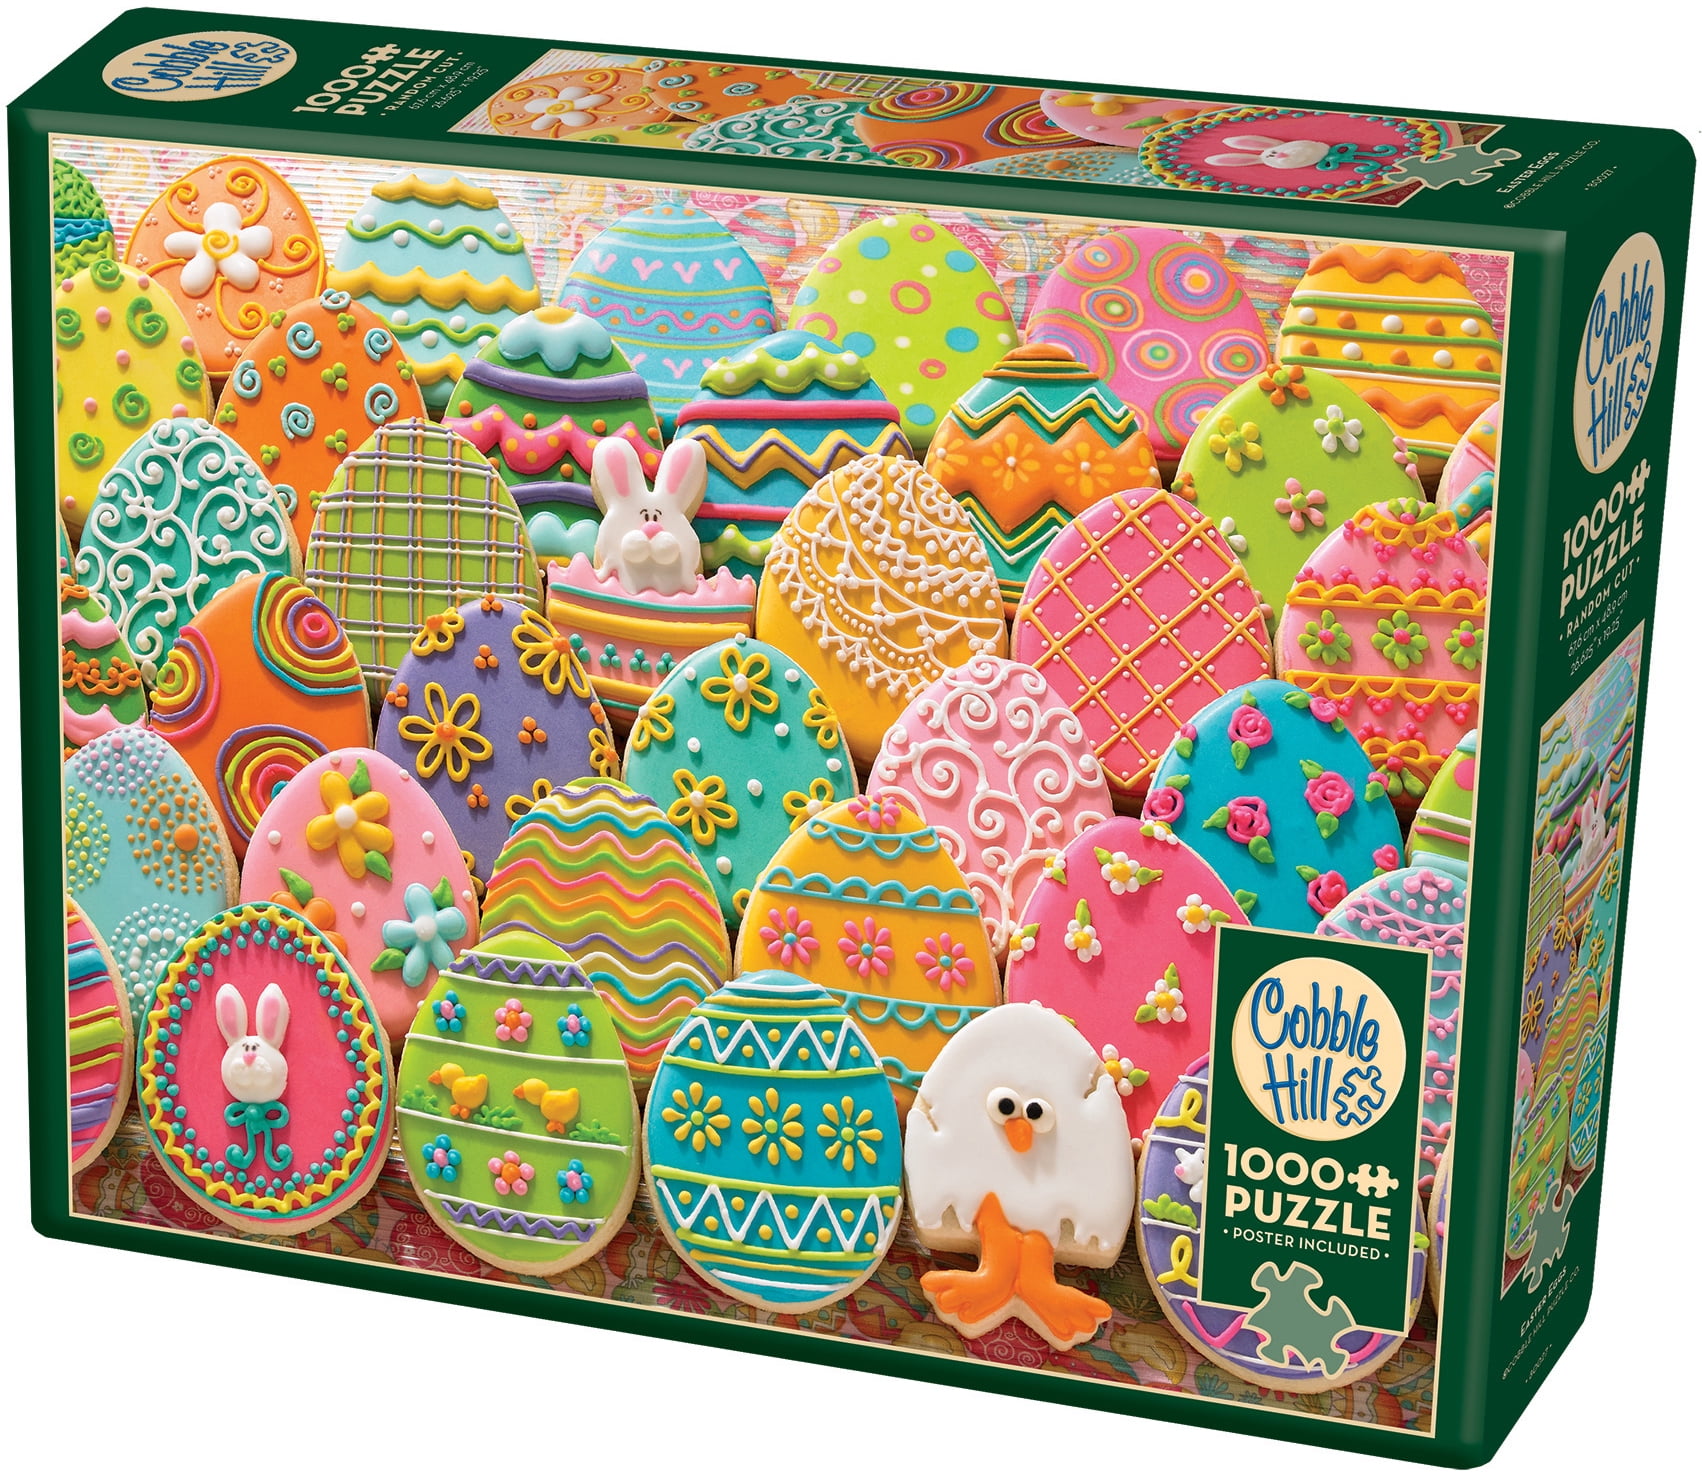 House of Puzzles Eggs for Sale 1000 Piece Jigsaw Puzzle Toys 